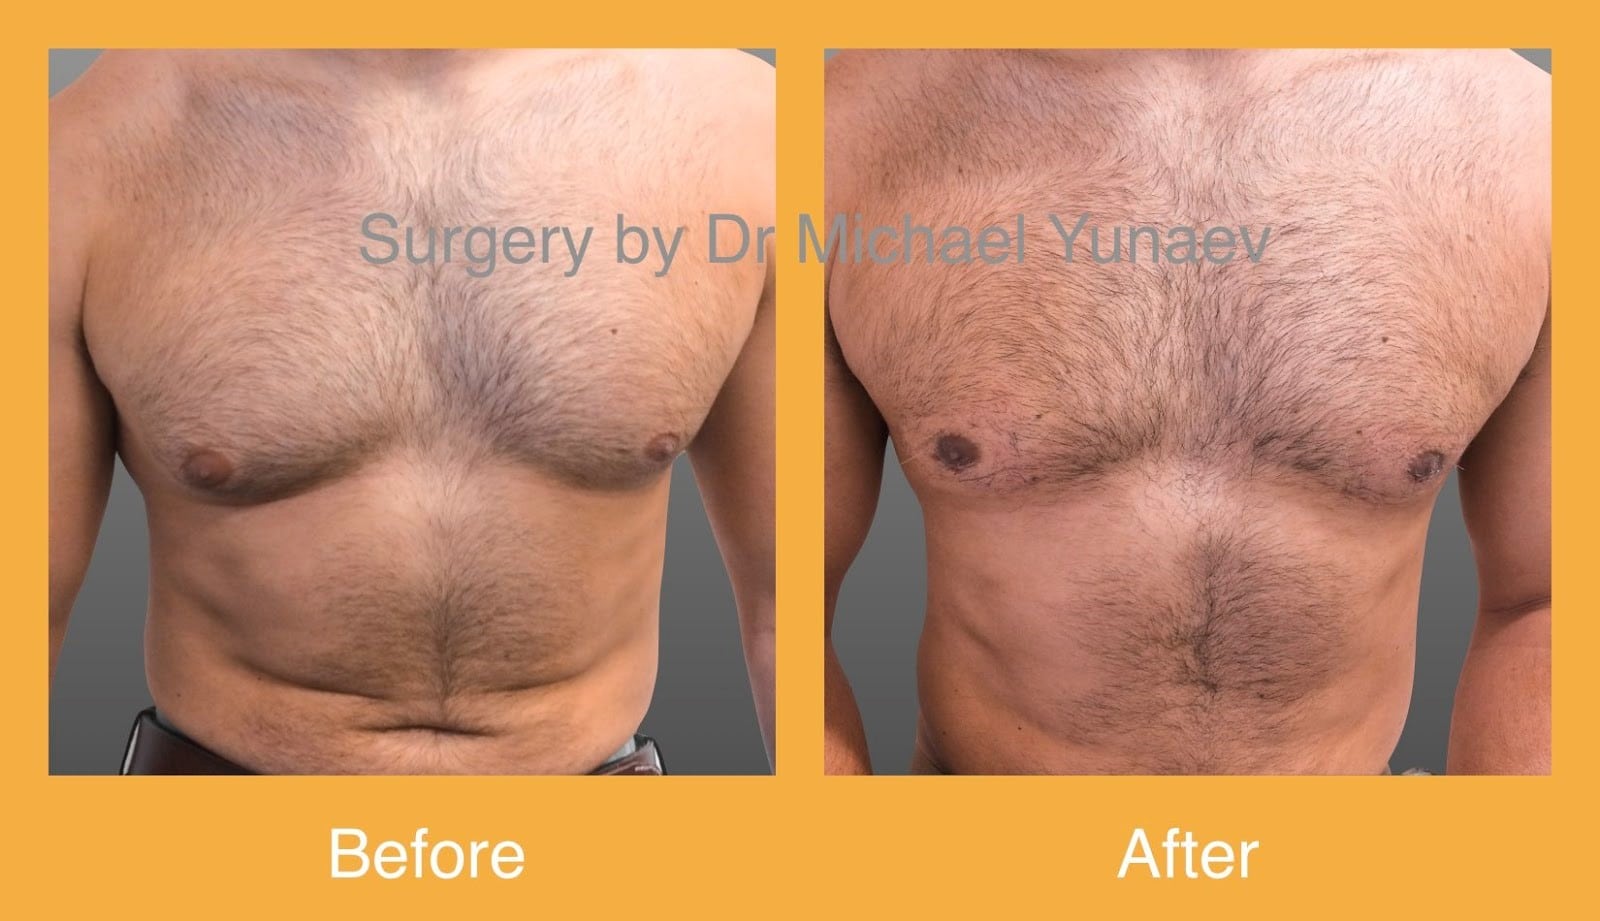 Man boobs surgery before and after 01, surgery for Gynaecomastia at BB Clinic in Sydney